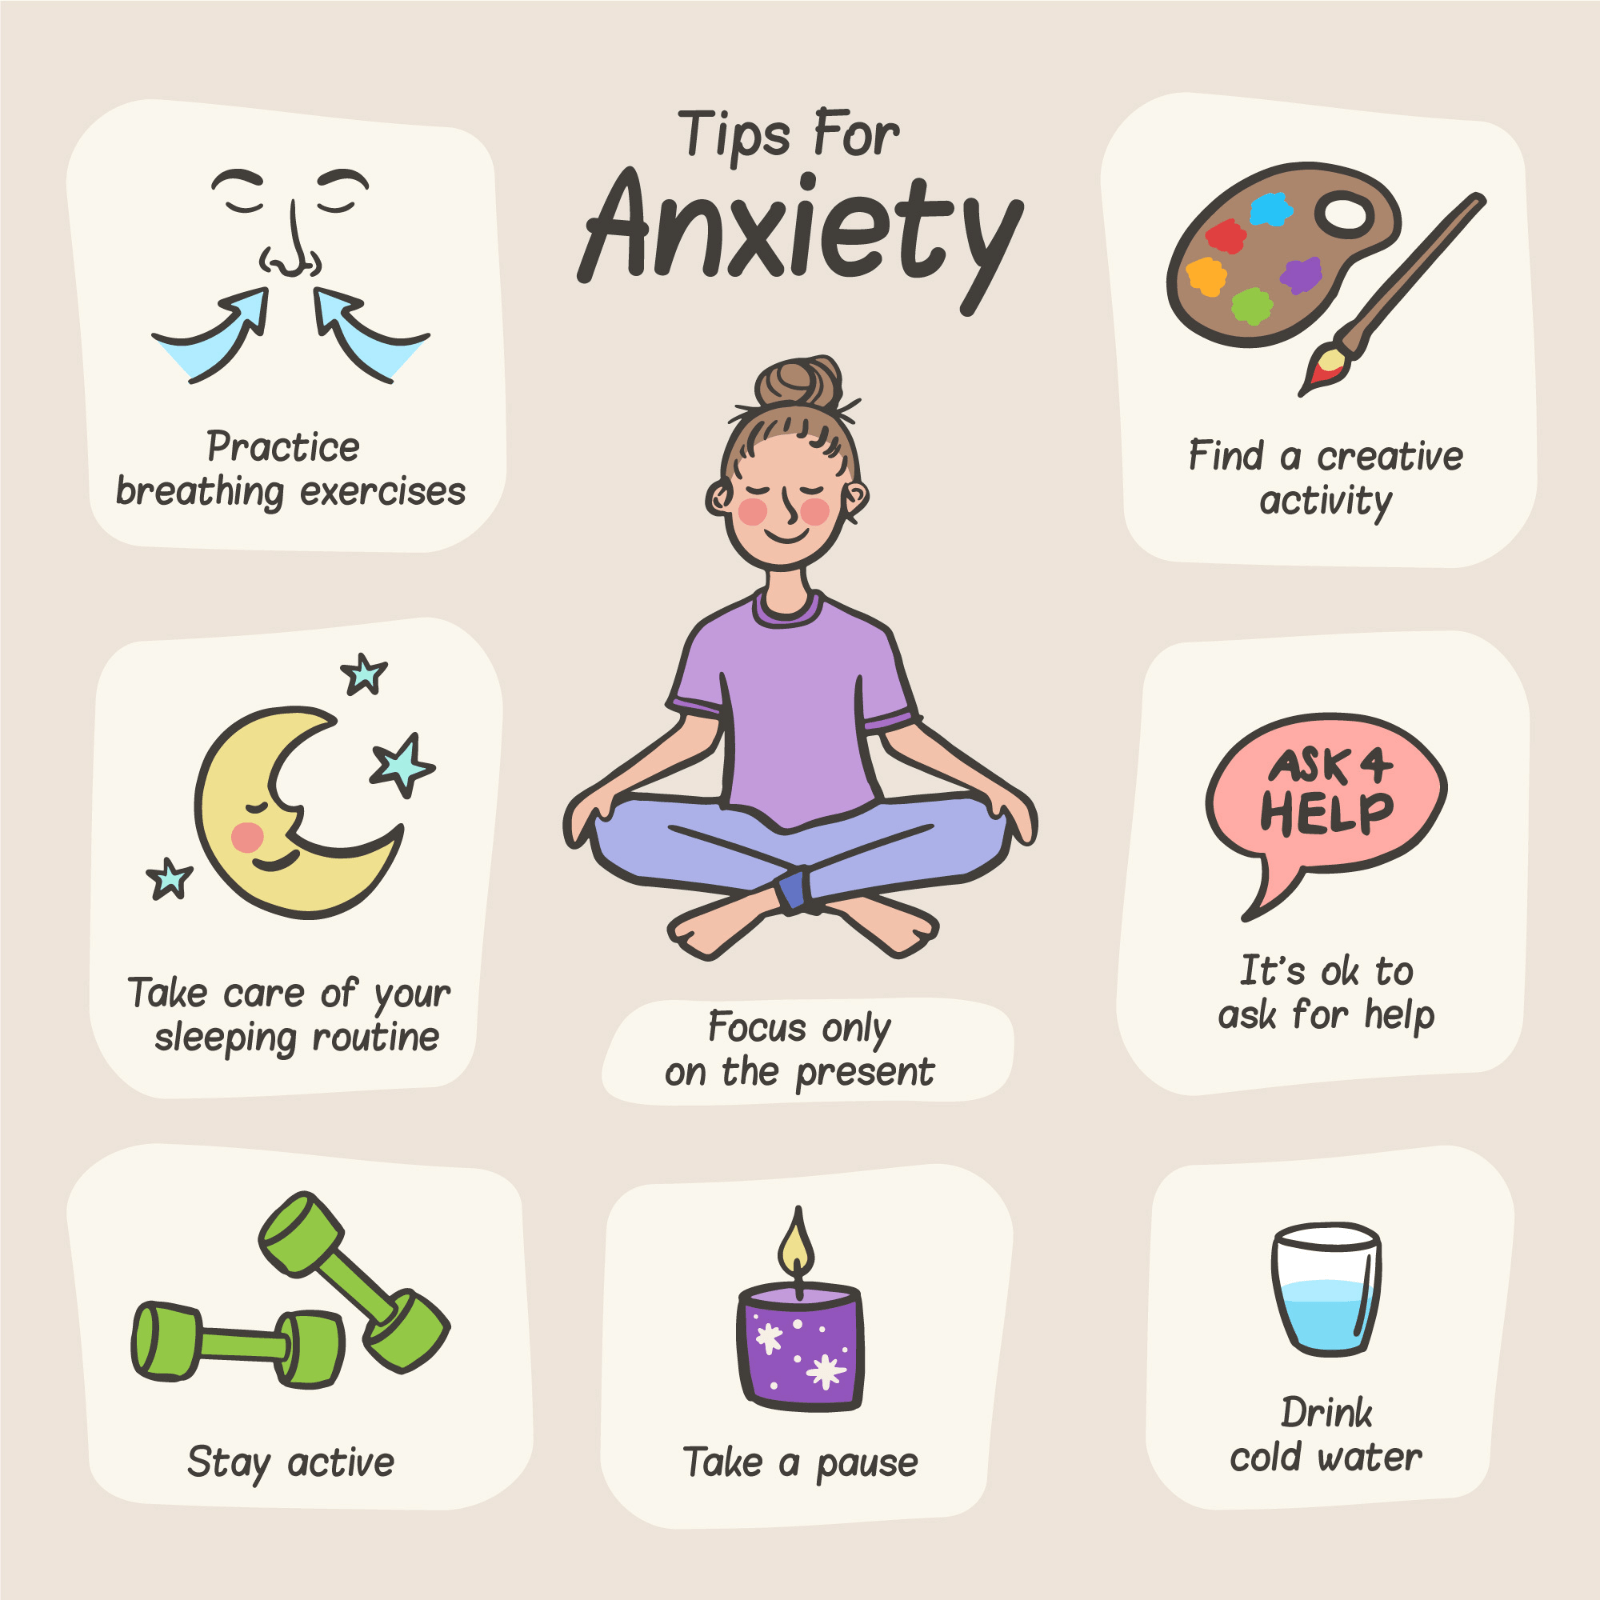 Anxiety management techniques